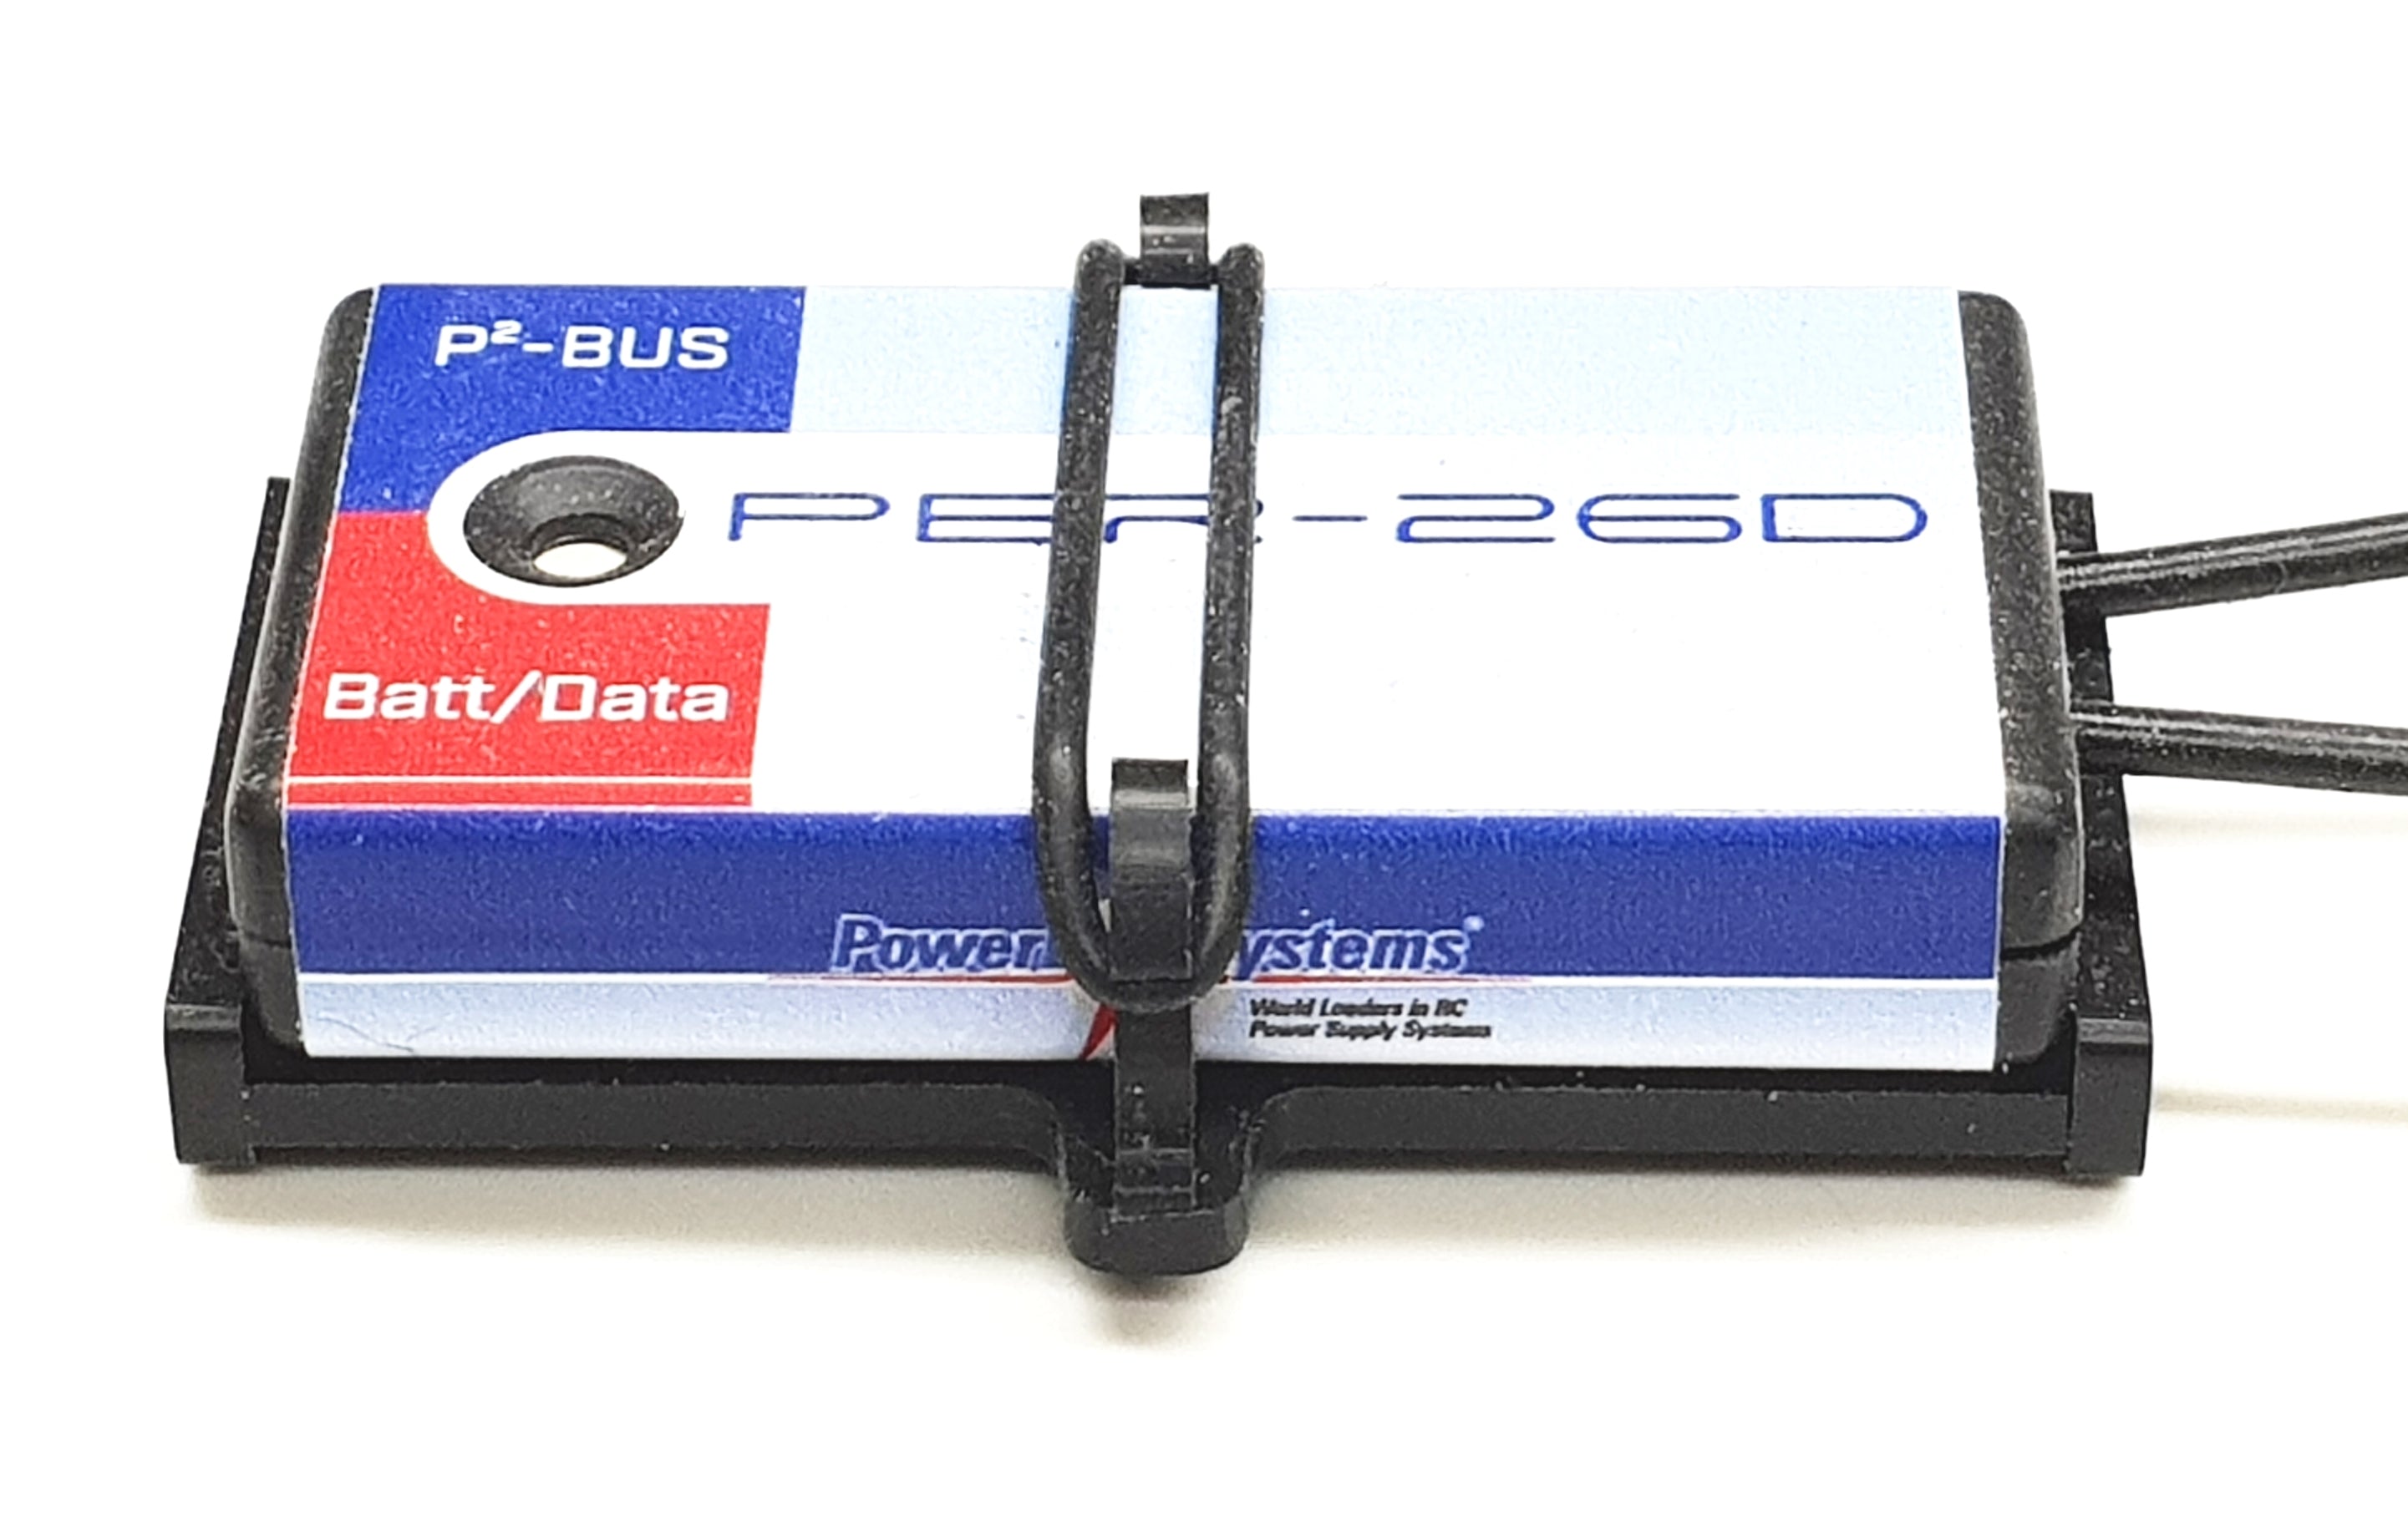 PowerBox Systems PBR-26D Receiver Click Holder from STV-Tech 013-64